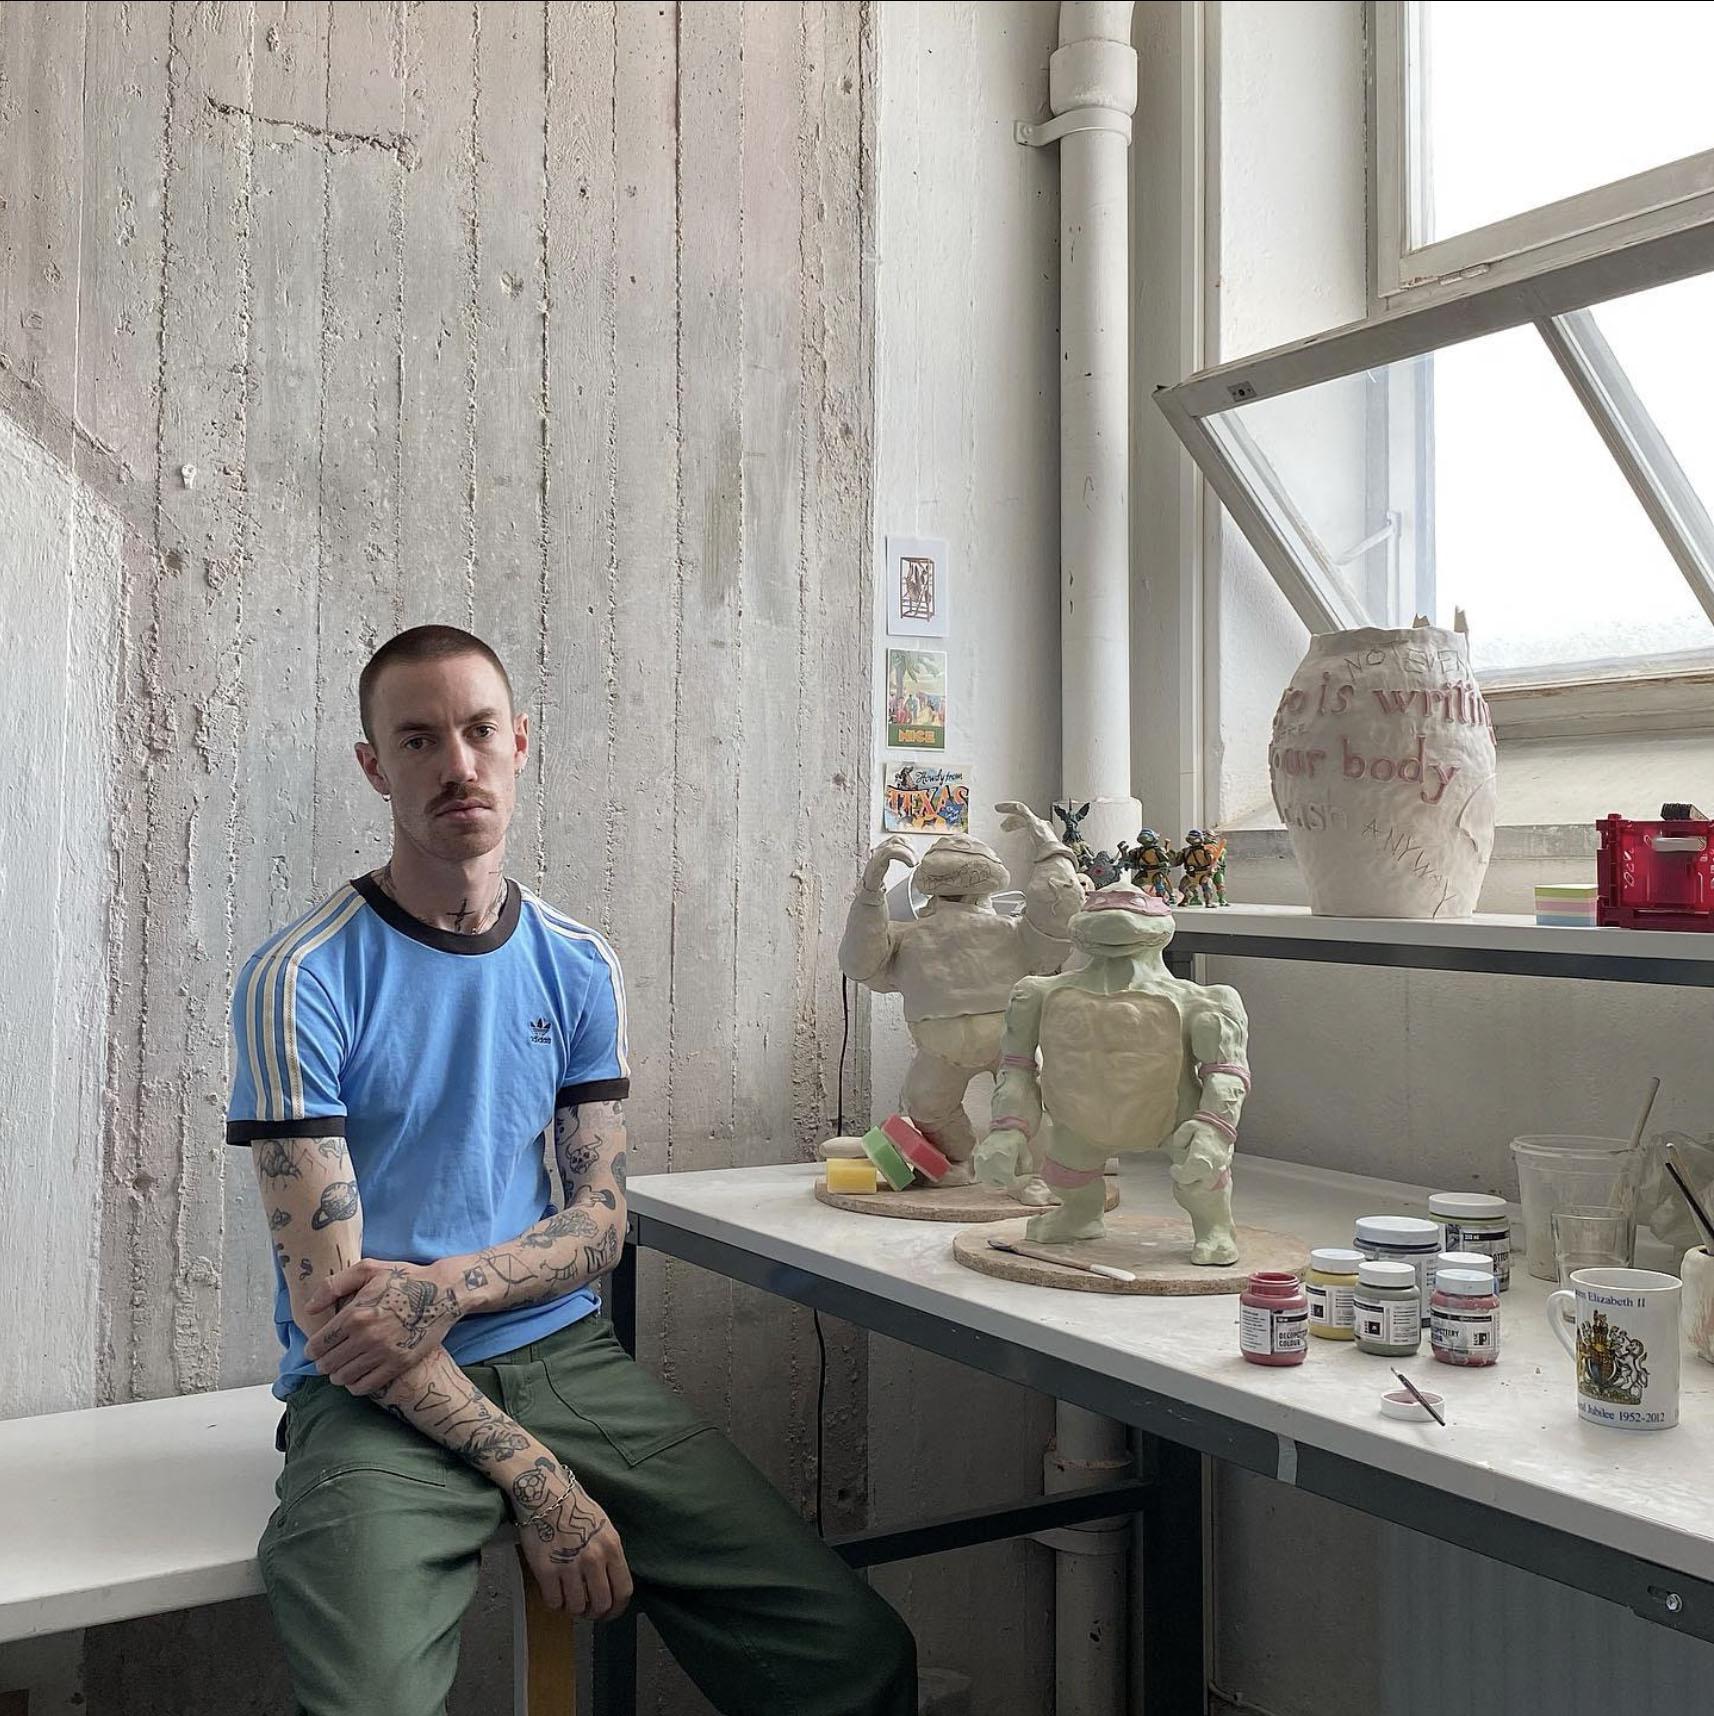 Truls Mårtensson (b, 1993, Linköping) works with ceramics to transform the societal consumer culture in to his pieces, where his references to historical pop-art does not go unnoticed. The critique of a digitalized and capitalistic society in